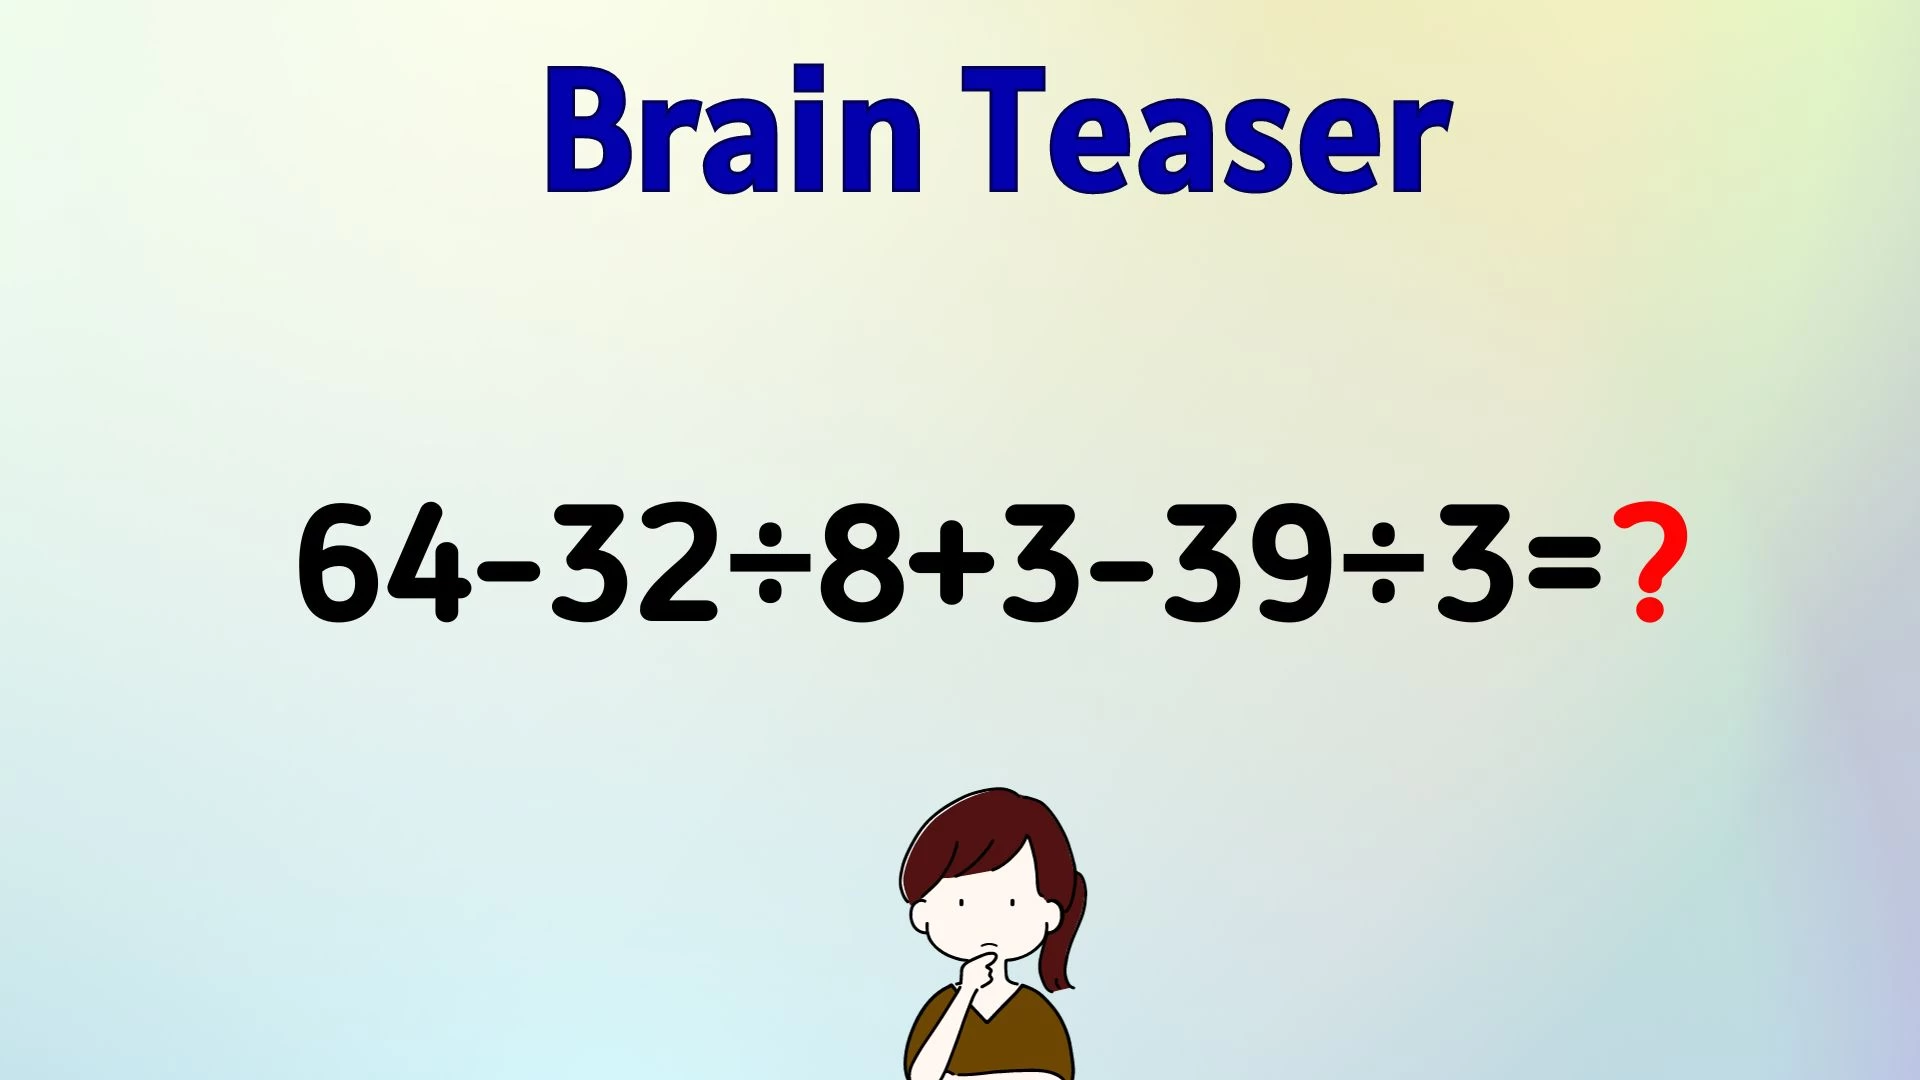 Can You Solve This Math Puzzle? Equate 64-32÷8+3-39÷3=?